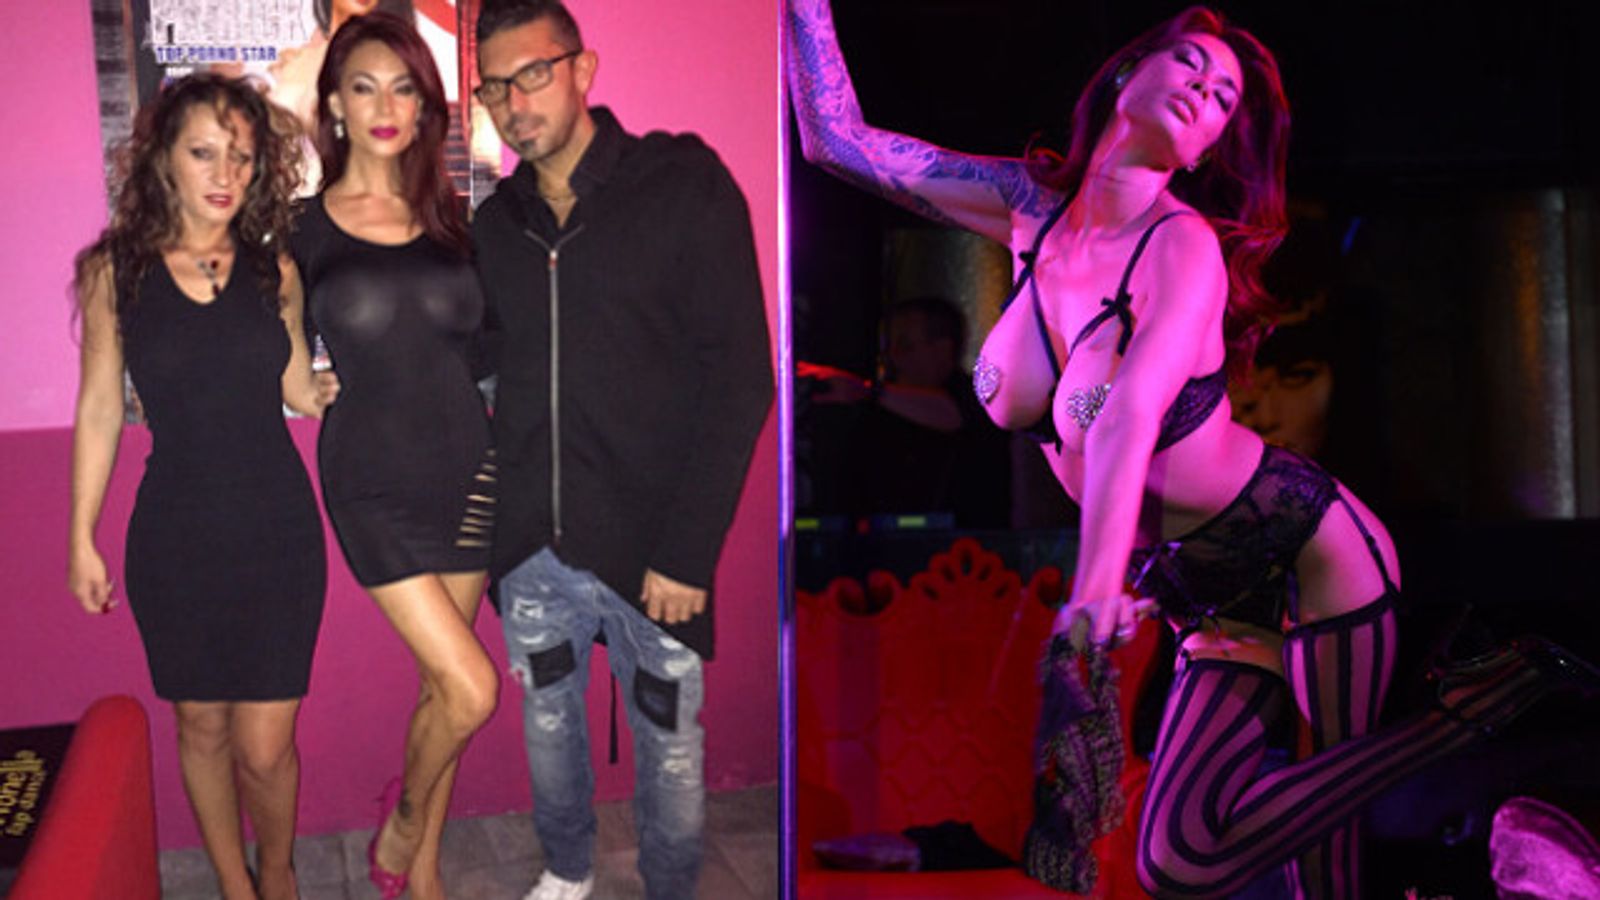 Postcard From Italy: Tera Patrick Sets Up in Europe